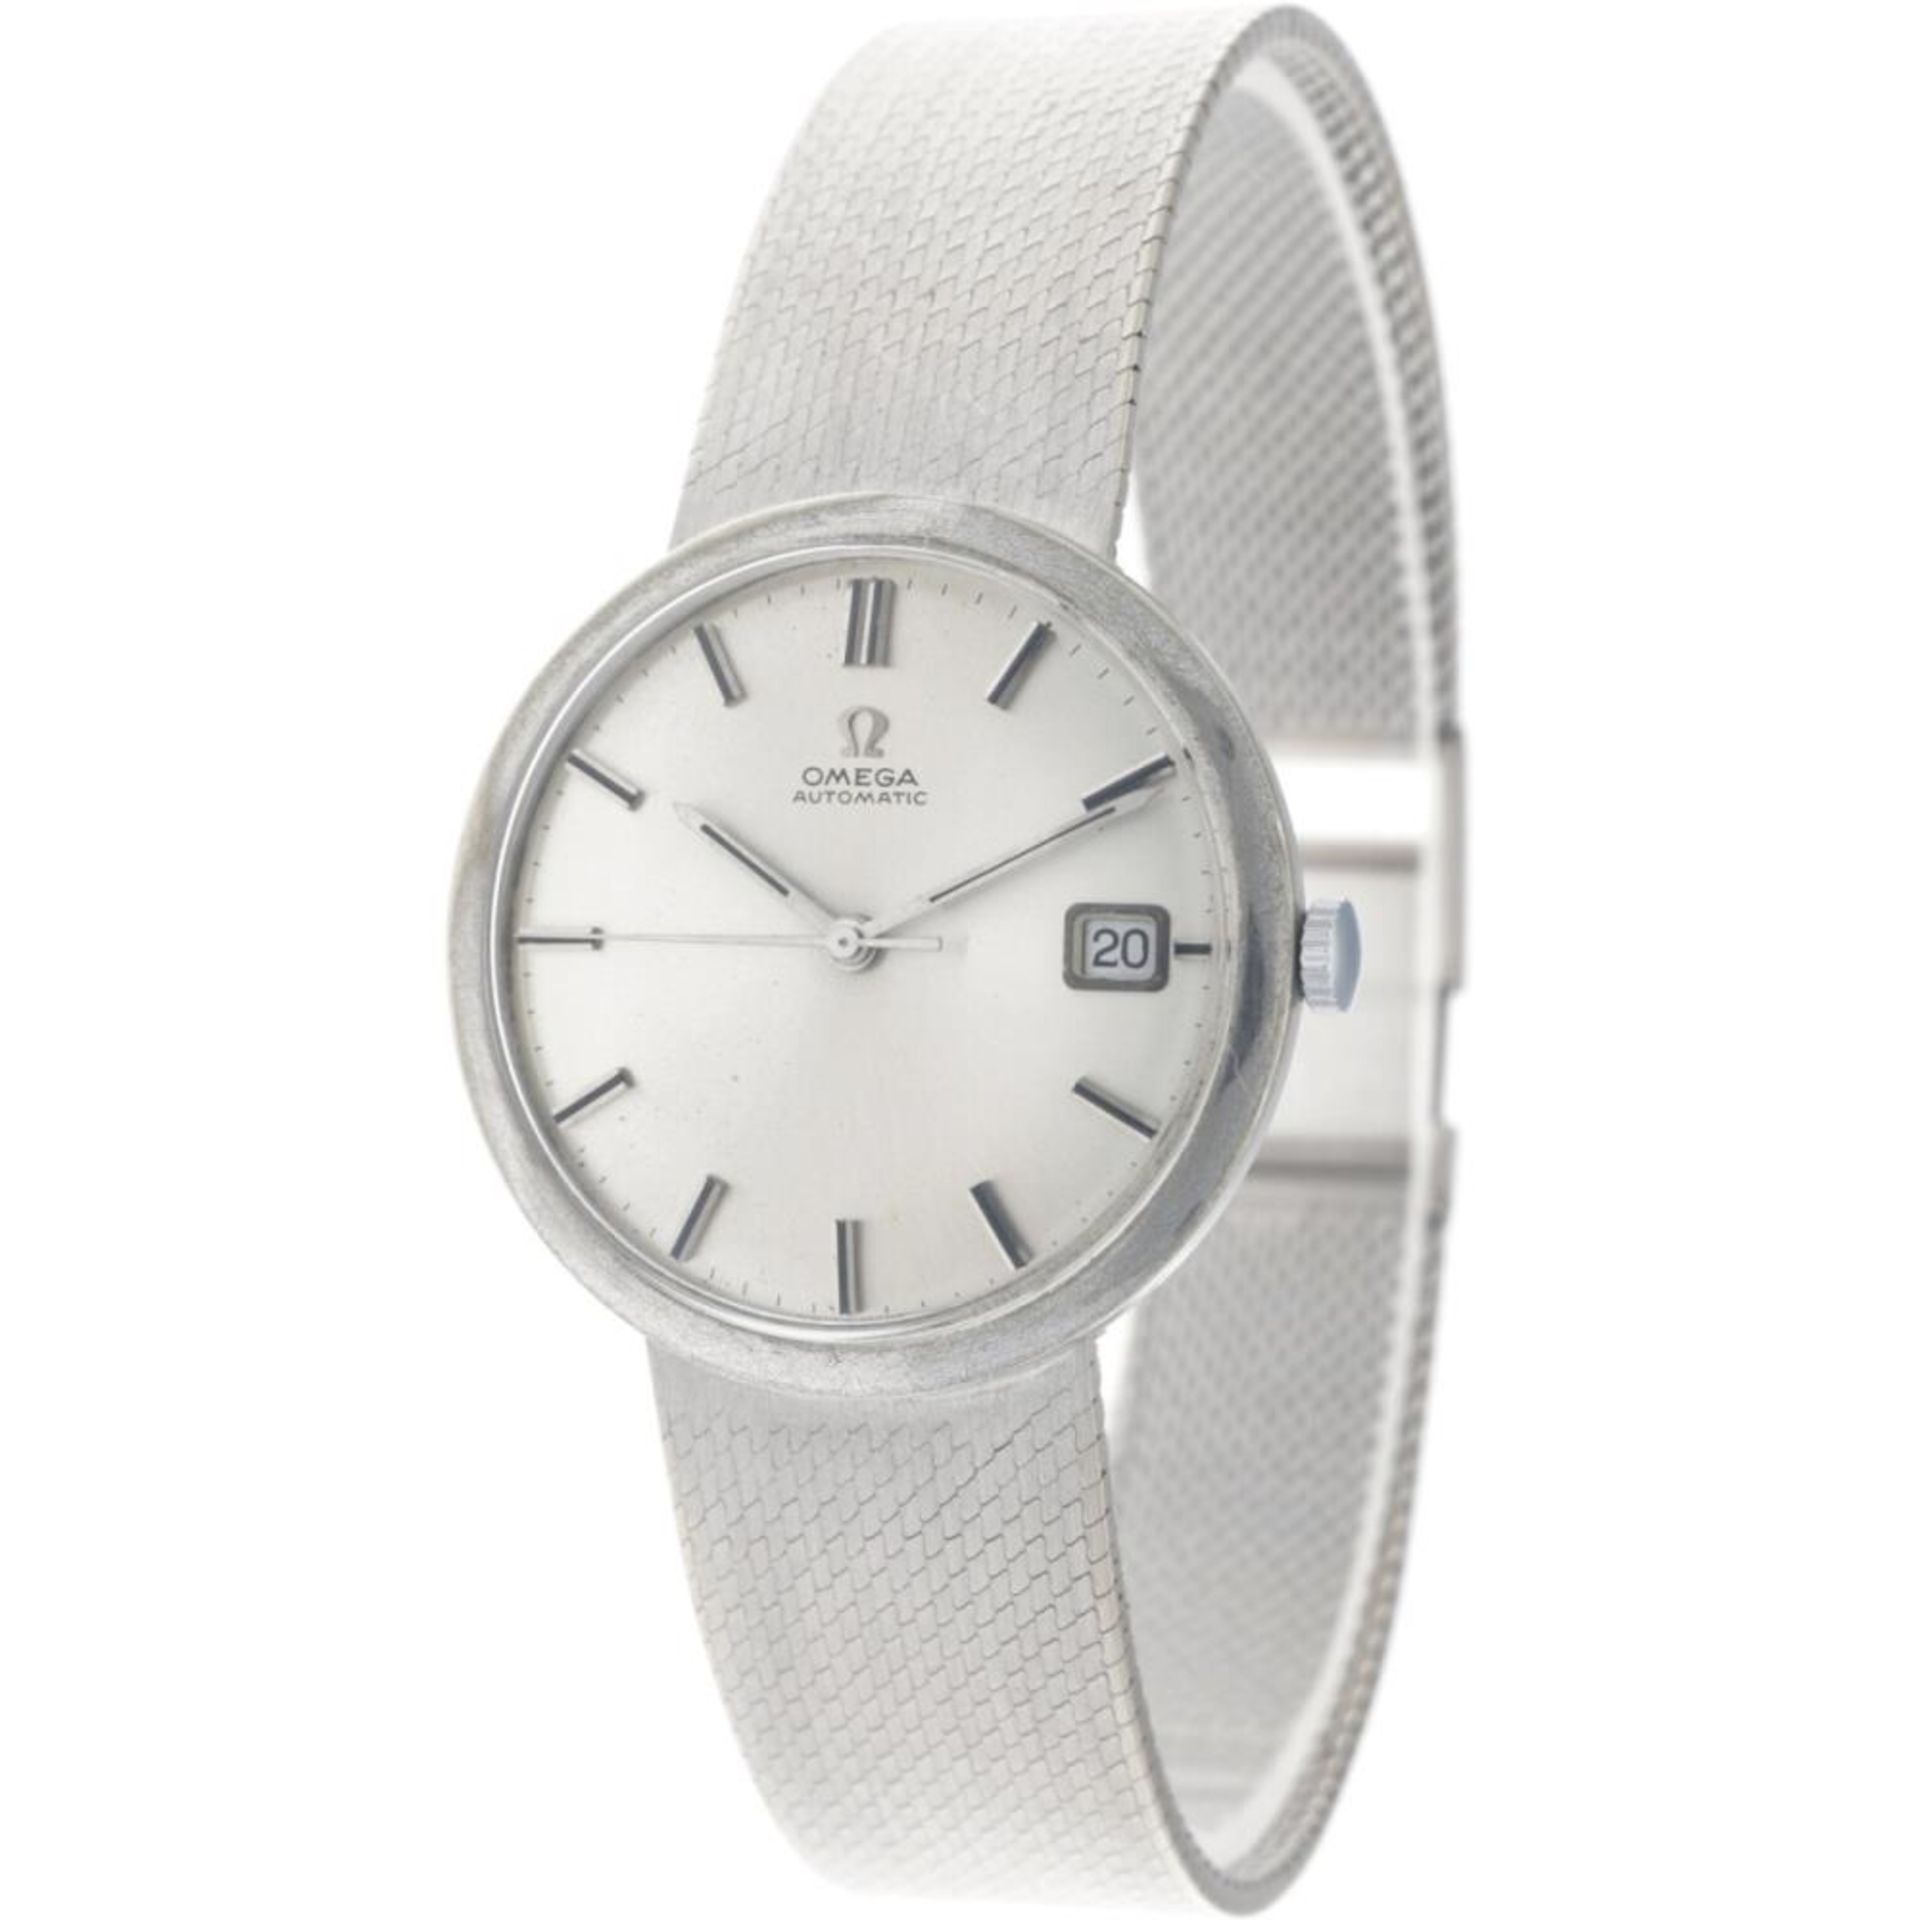 Omega white gold - Men's watch - ca. 1960. - Image 2 of 6